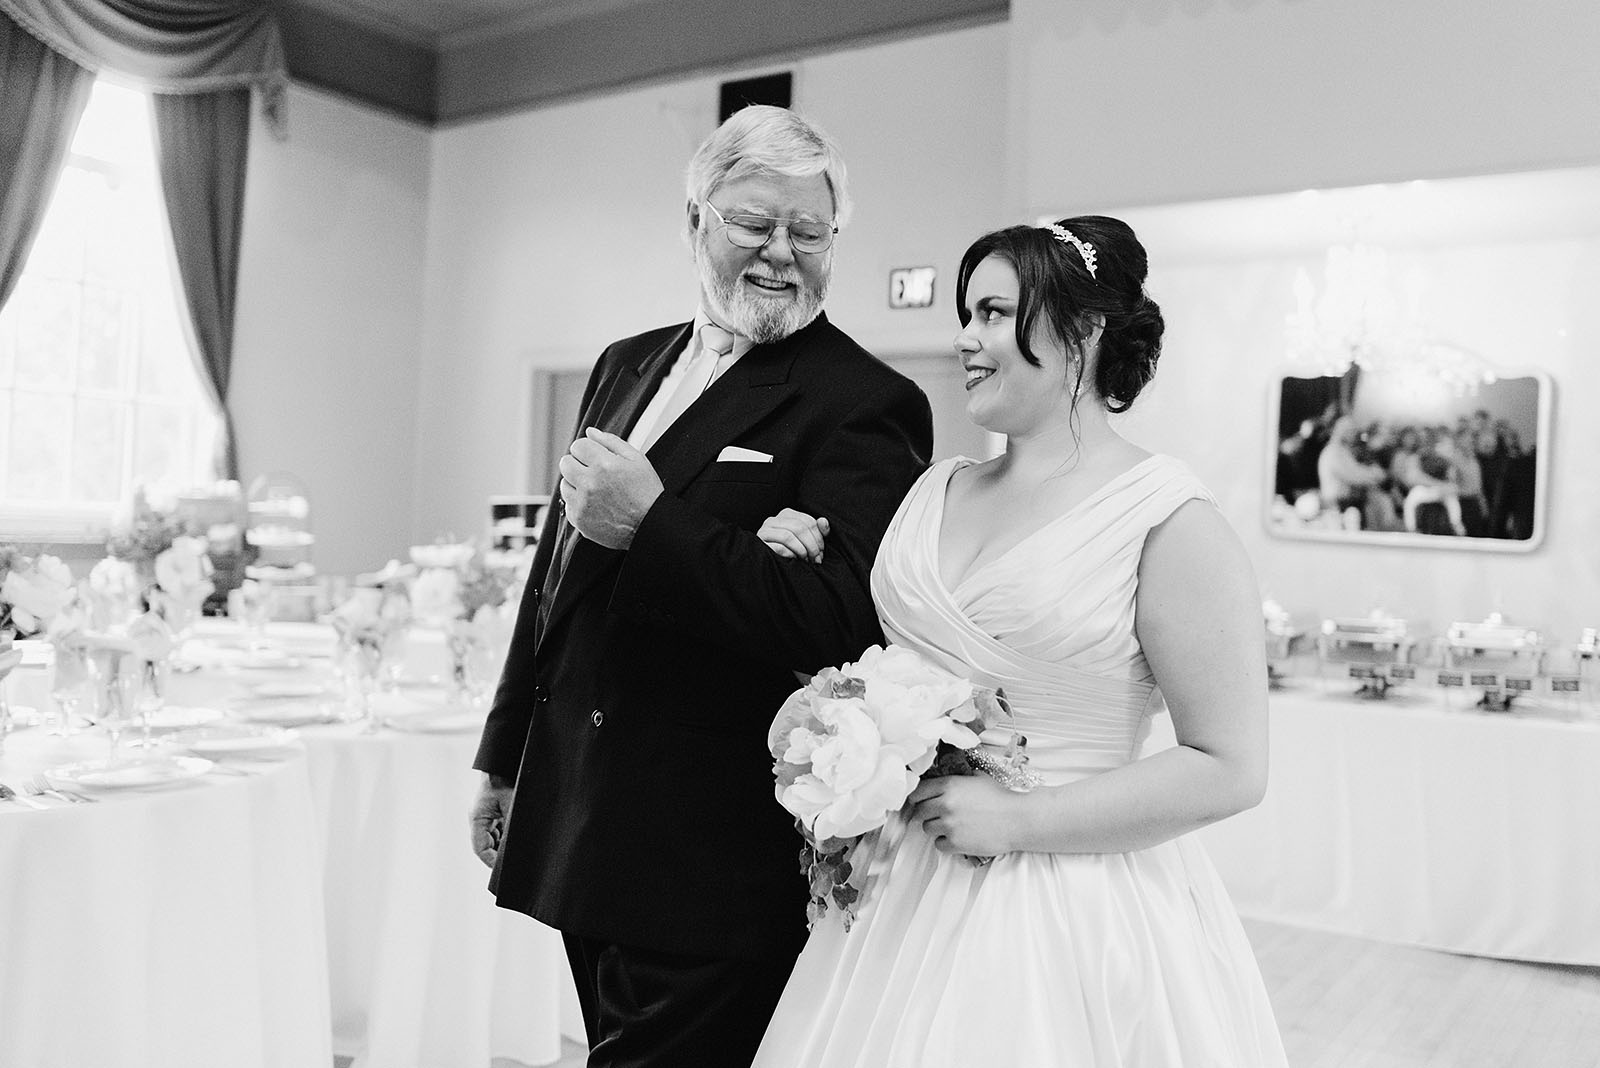 Father of the bride smiling while walking down the aisle - Polaris Hall Wedding